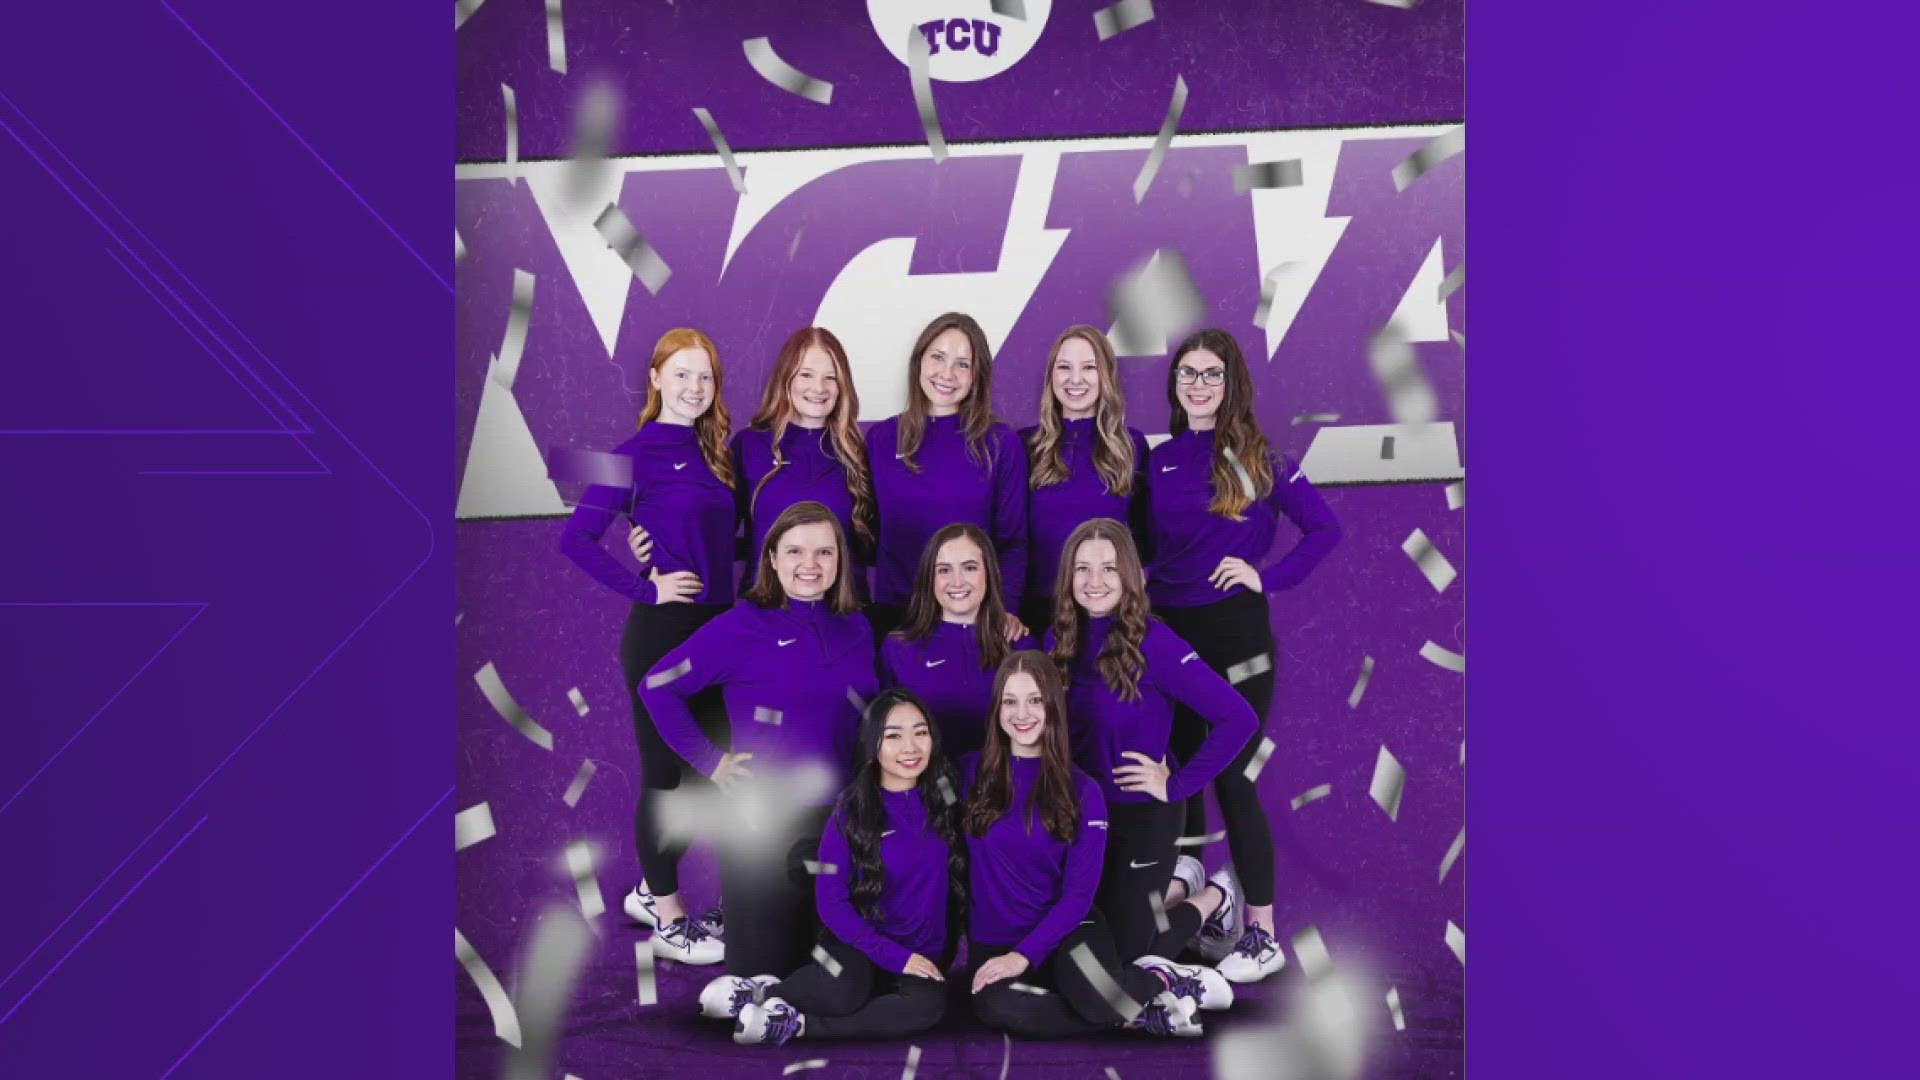 While NCAA rifle is a coed sport, the TCU program is all-female, and the Horned Frogs remain the only all-female squad to win a national title.